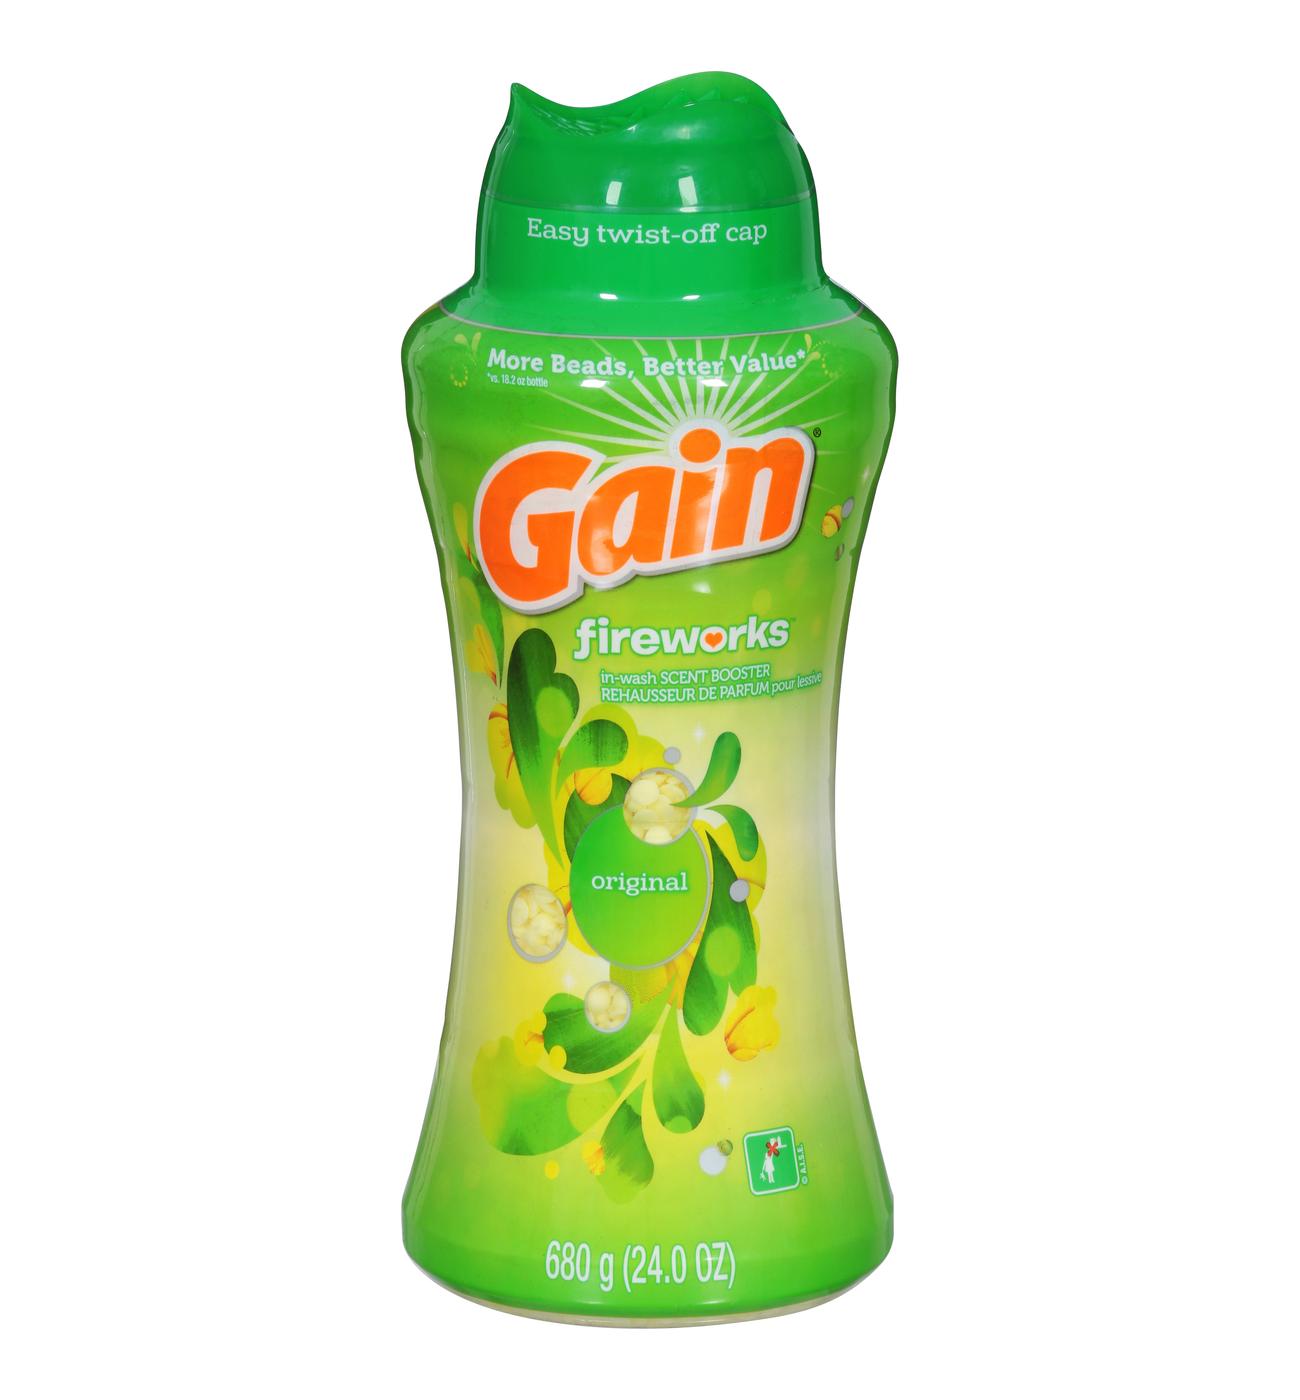 Gain Fireworks In-Wash Scent Booster - Original; image 1 of 11